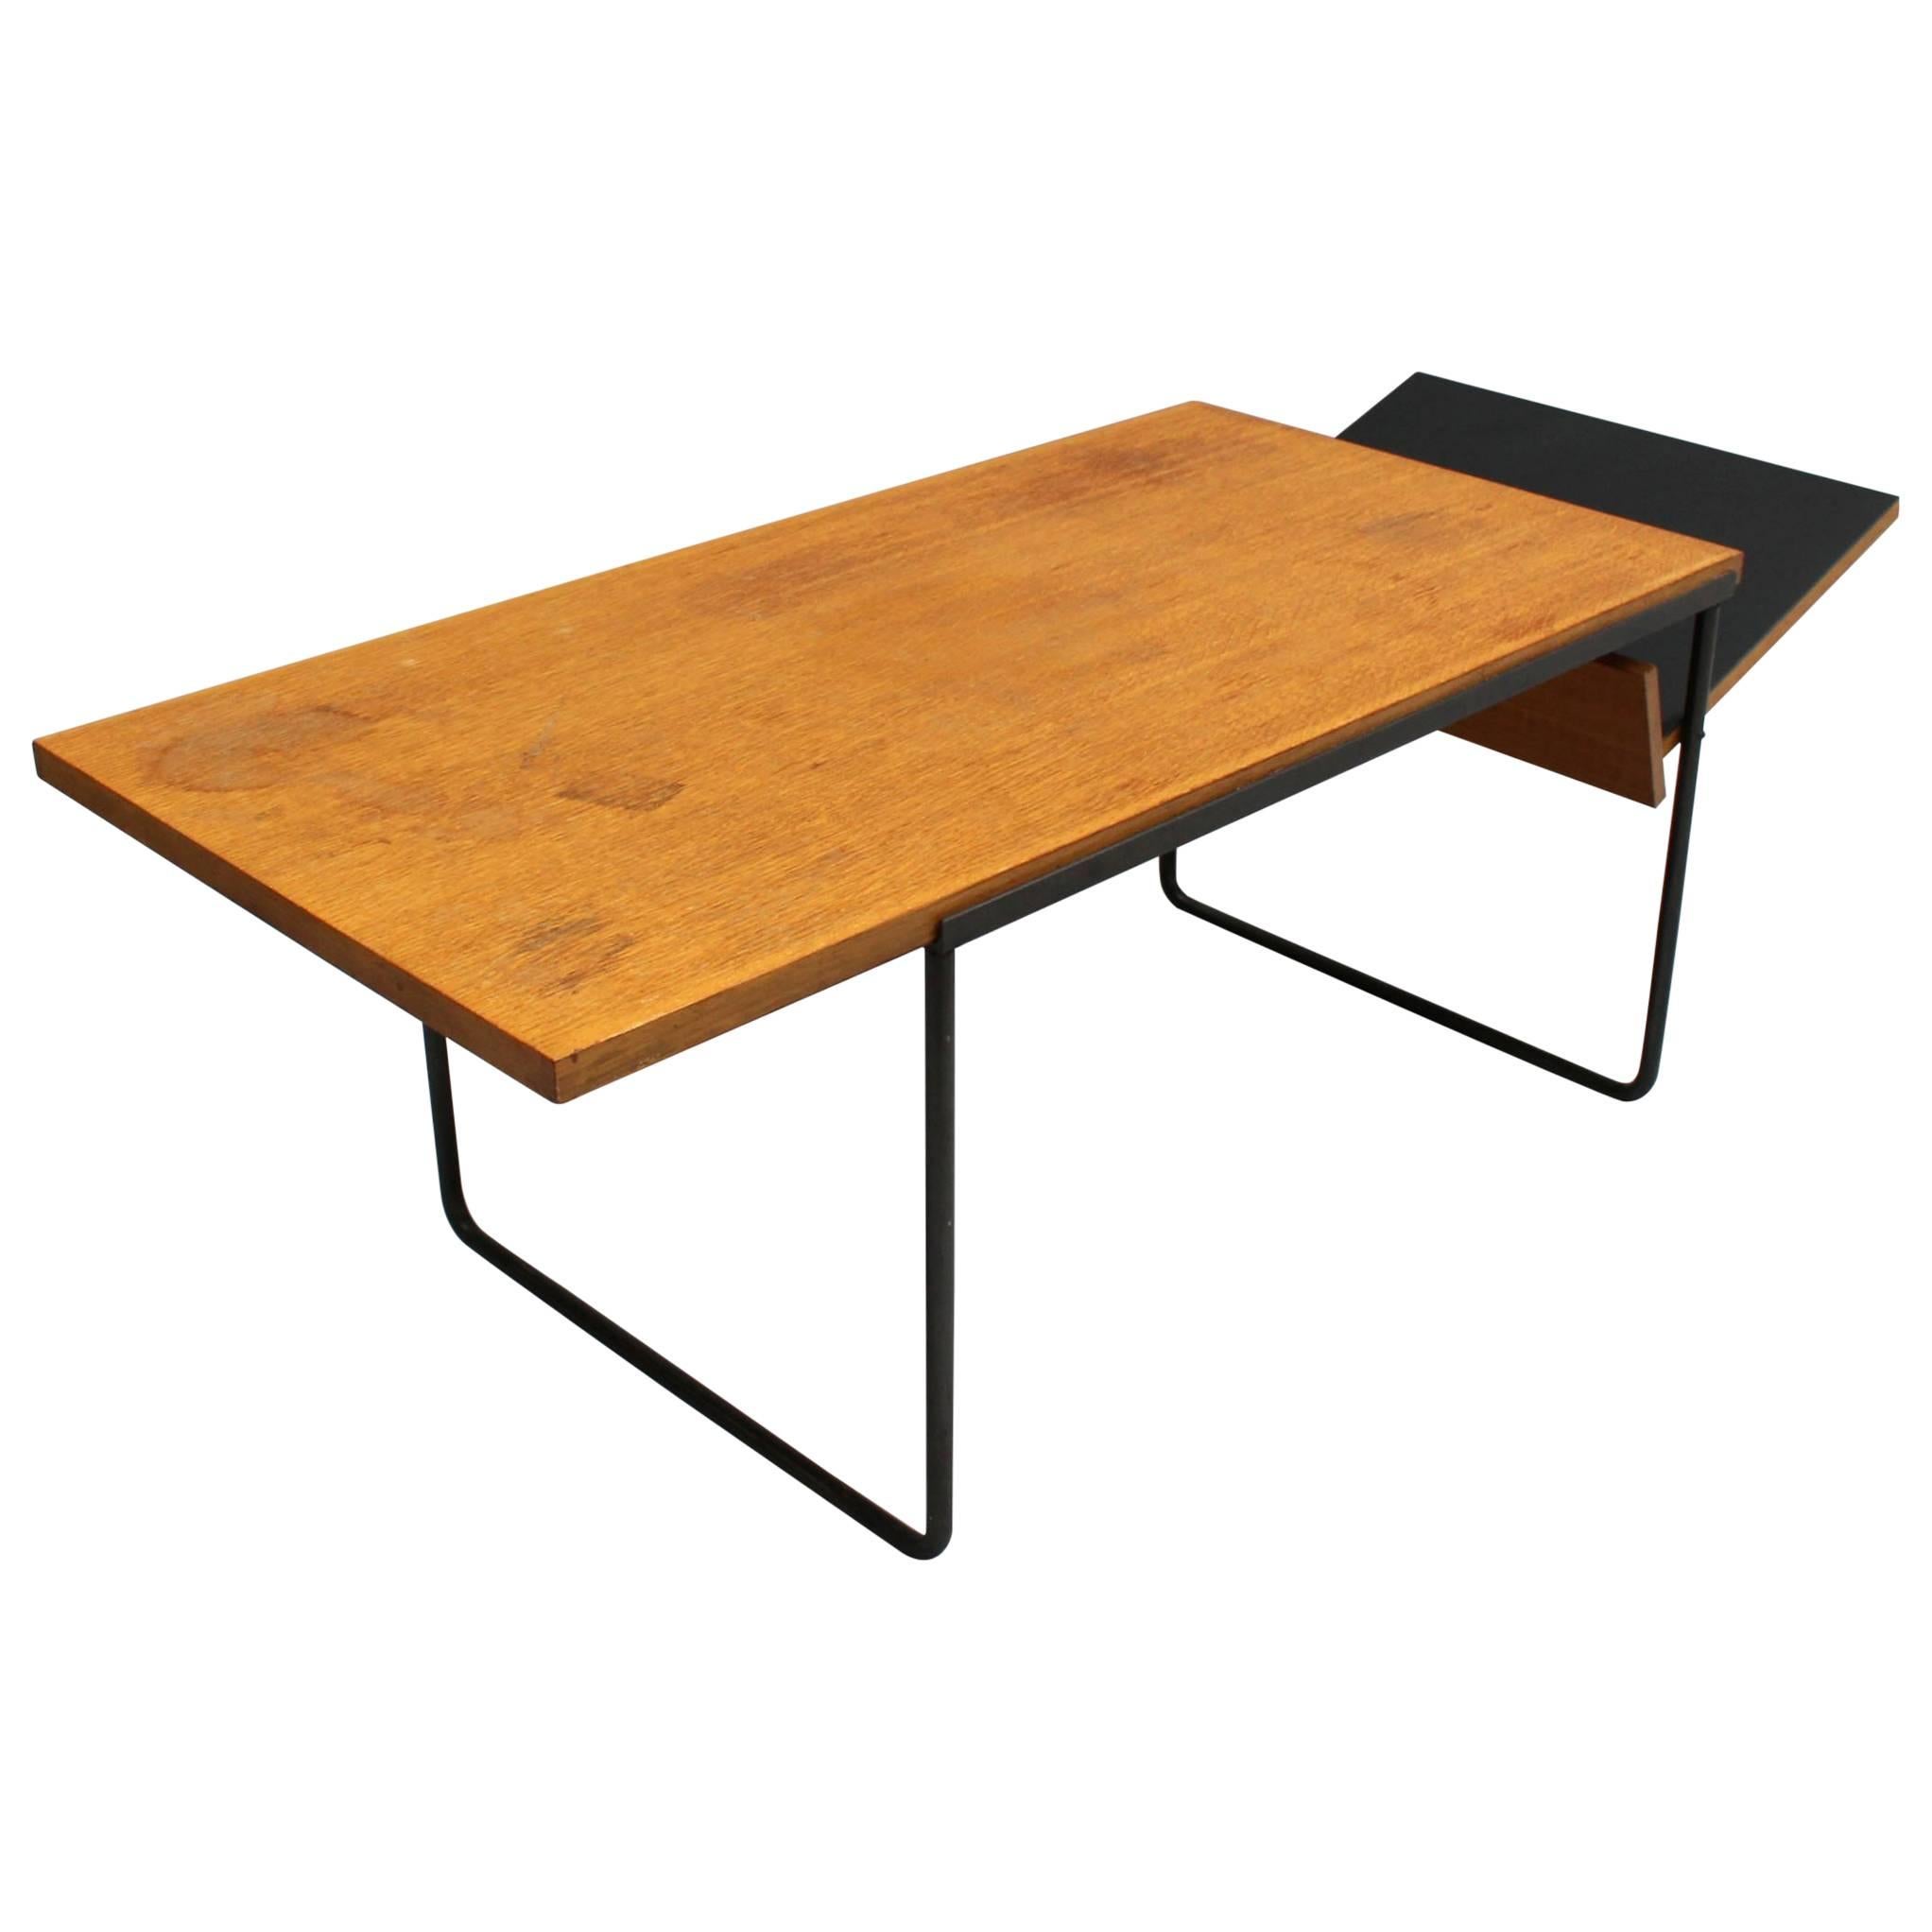 A Fine French Mid-Century Oak and Laminate Coffee Table with a Metal Base